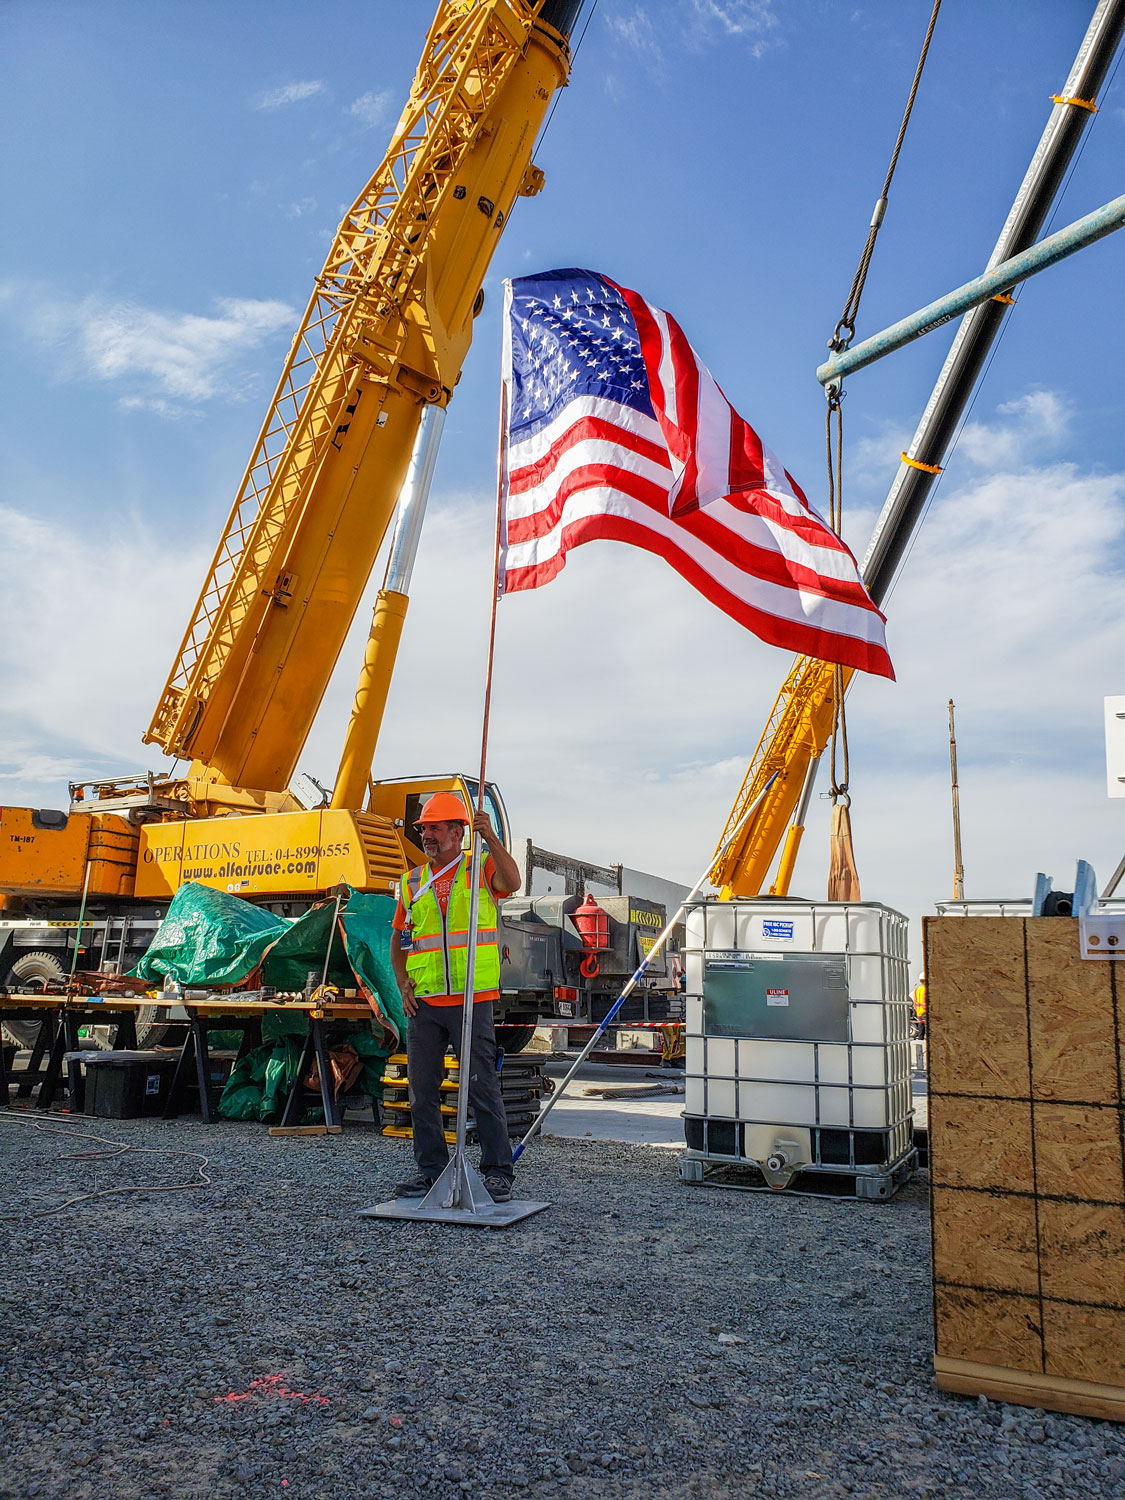 A man stands on gravel holding a flag pole with an American flag attached. Cranes stand behind him on an active construction site.